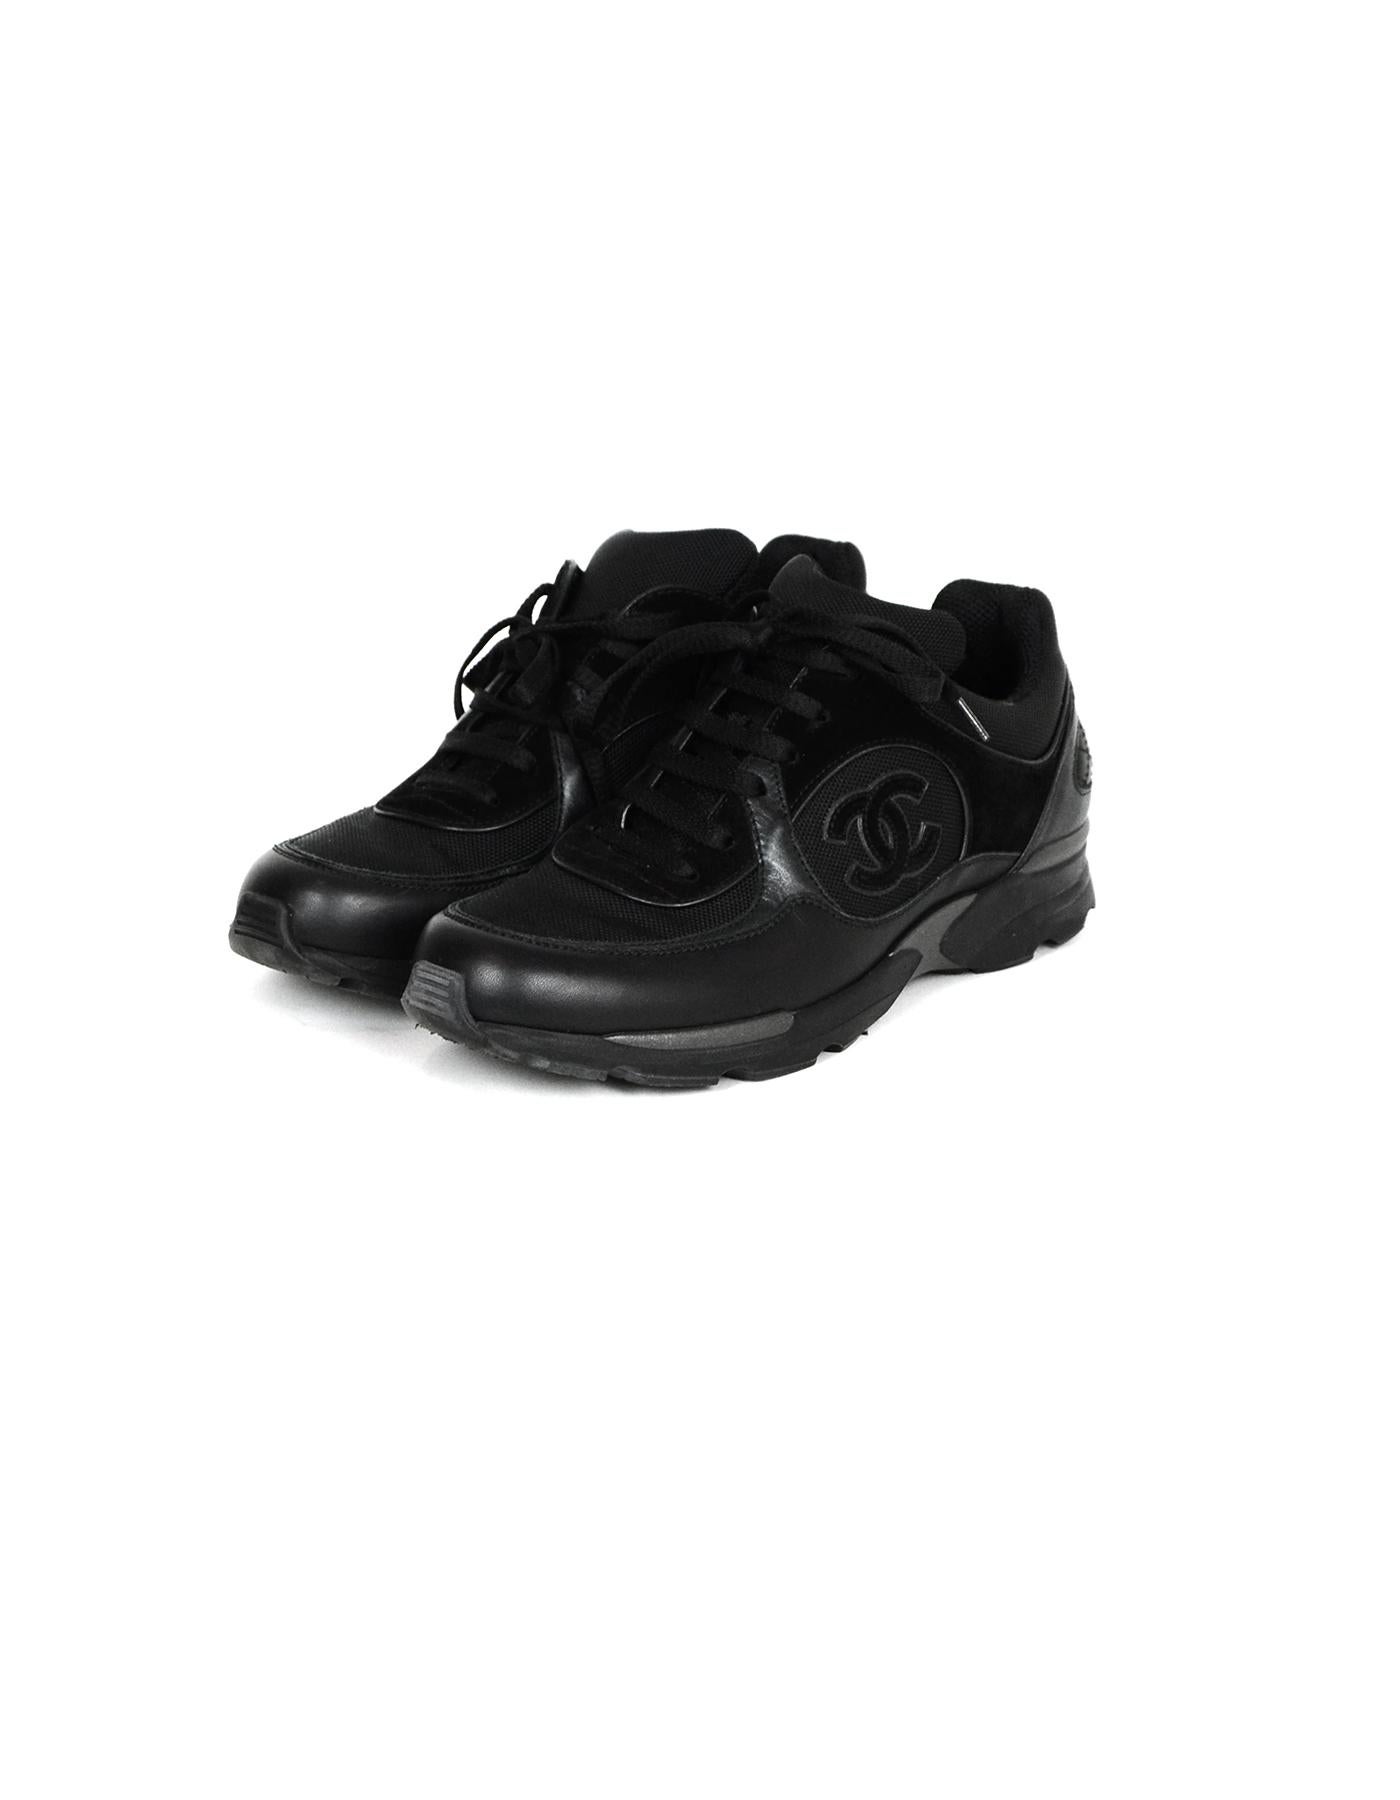 Chanel Black Leather/Suede Sneakers with CC Logo

Made In: Italy
Color: Black
Materials: Leather, suede
Closure/Opening: Lace-up 
Overall Condition: Excellent pre-owned condition, minor wear to soles
Estimated Retail: $850 + tax
Includes: